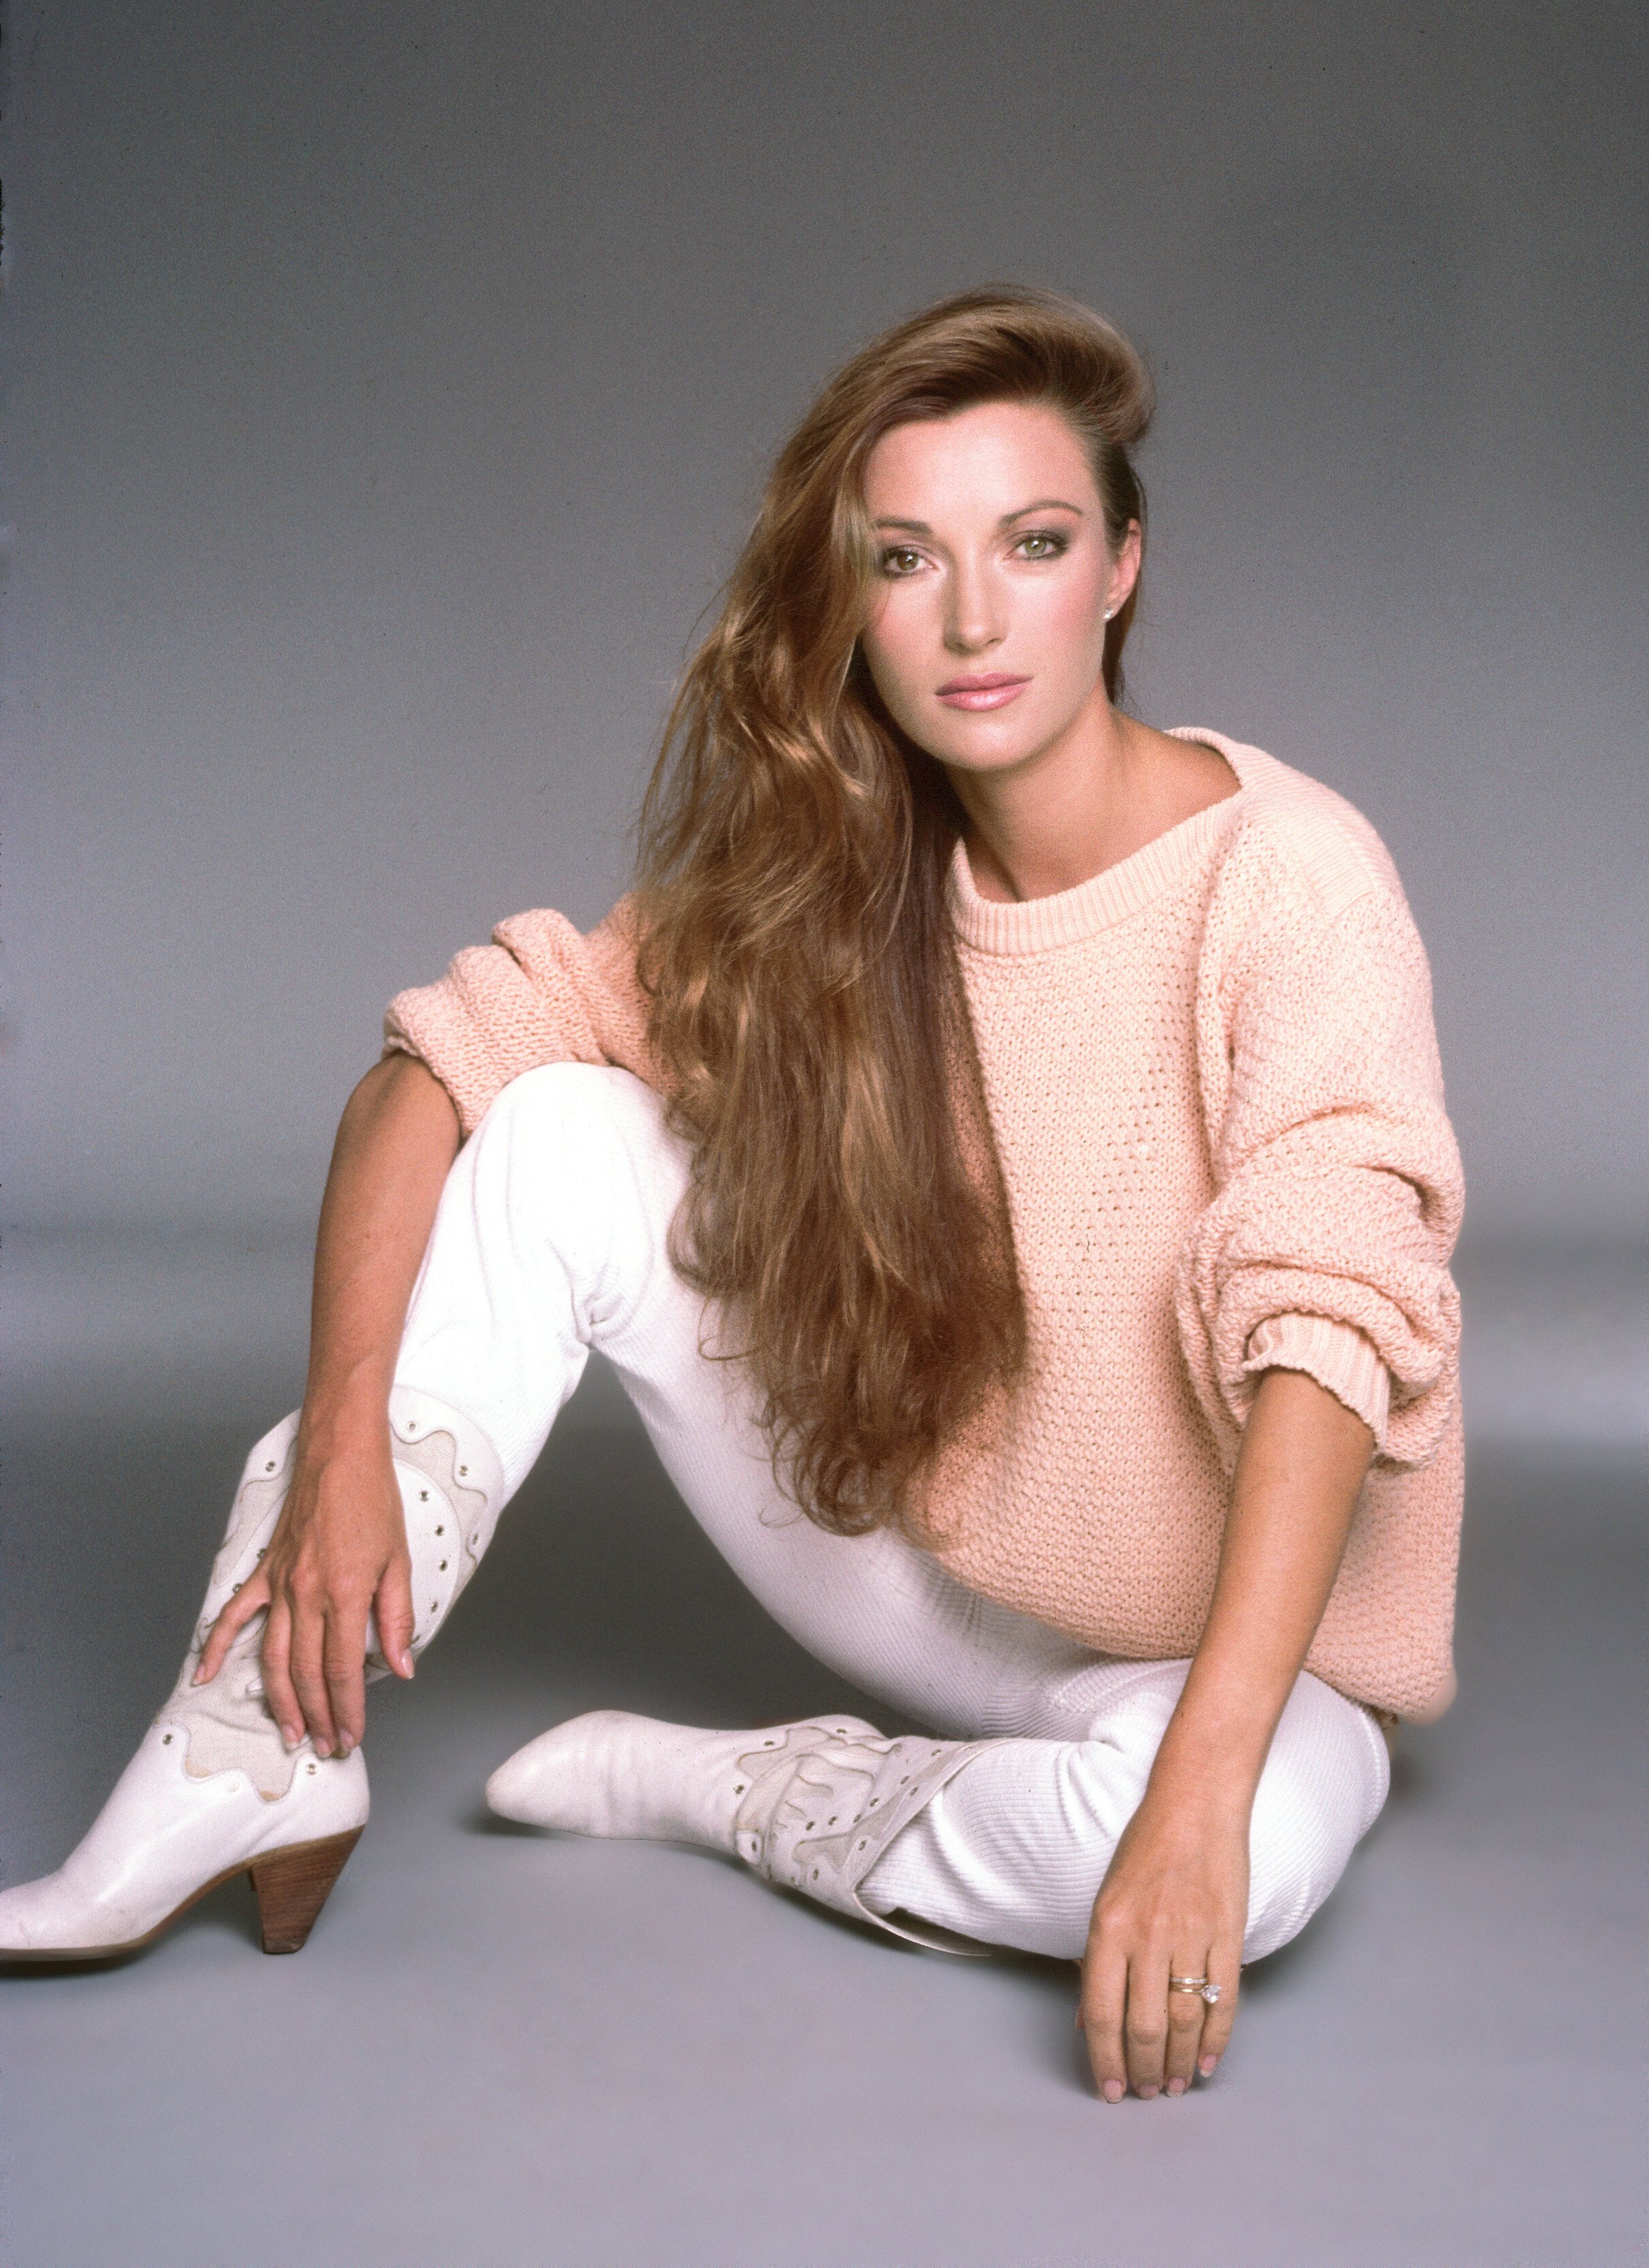 A portrait of Jane Seymour in 1985 | Source: Getty Images